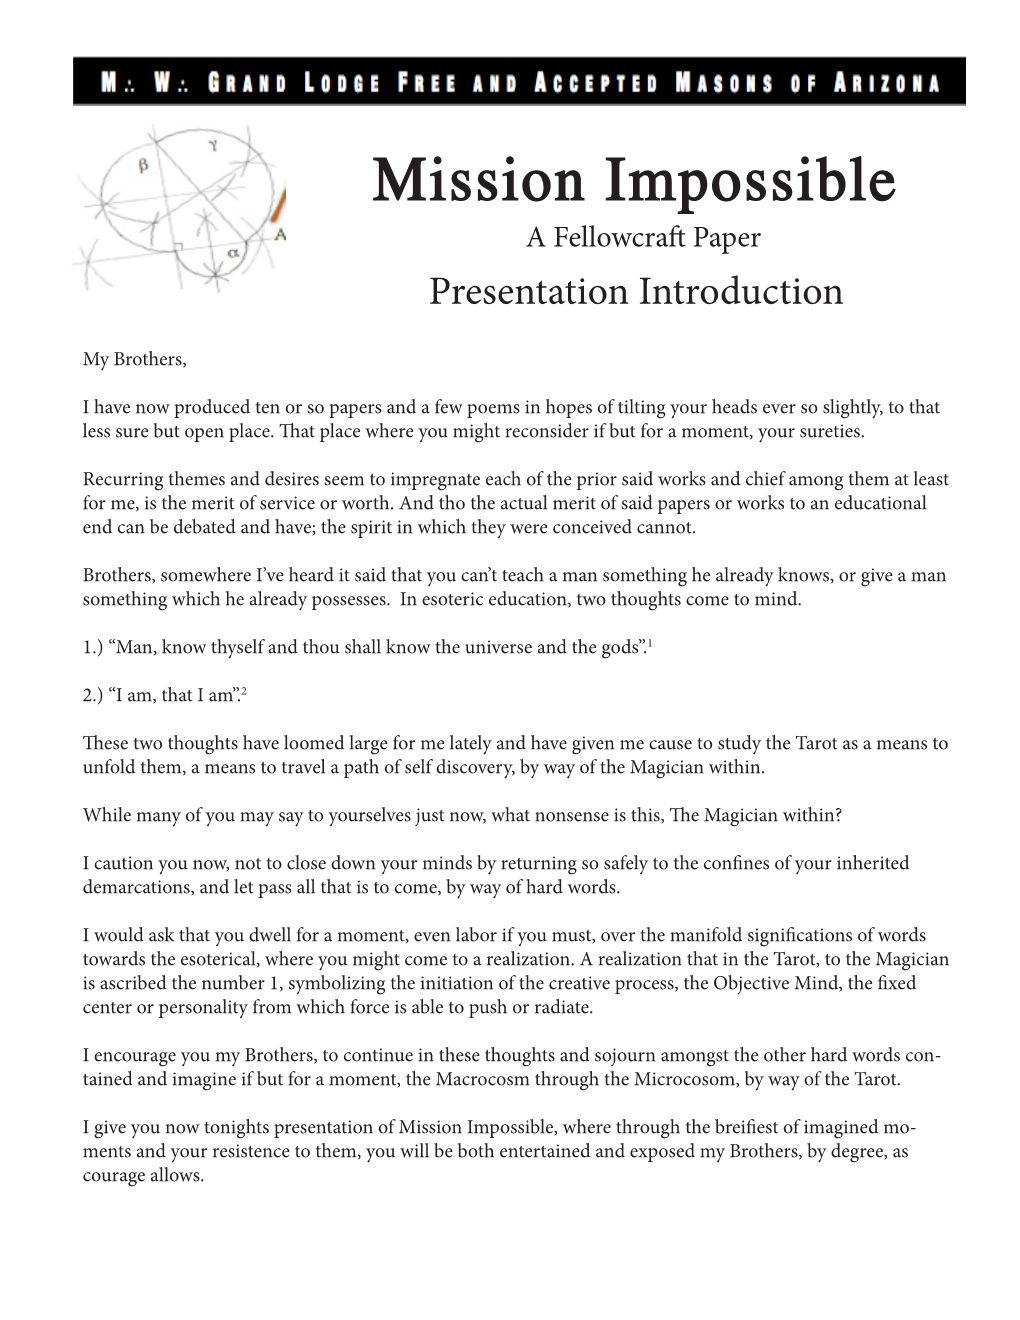 Mission Impossible a Fellowcraft Paper Presentation Introduction